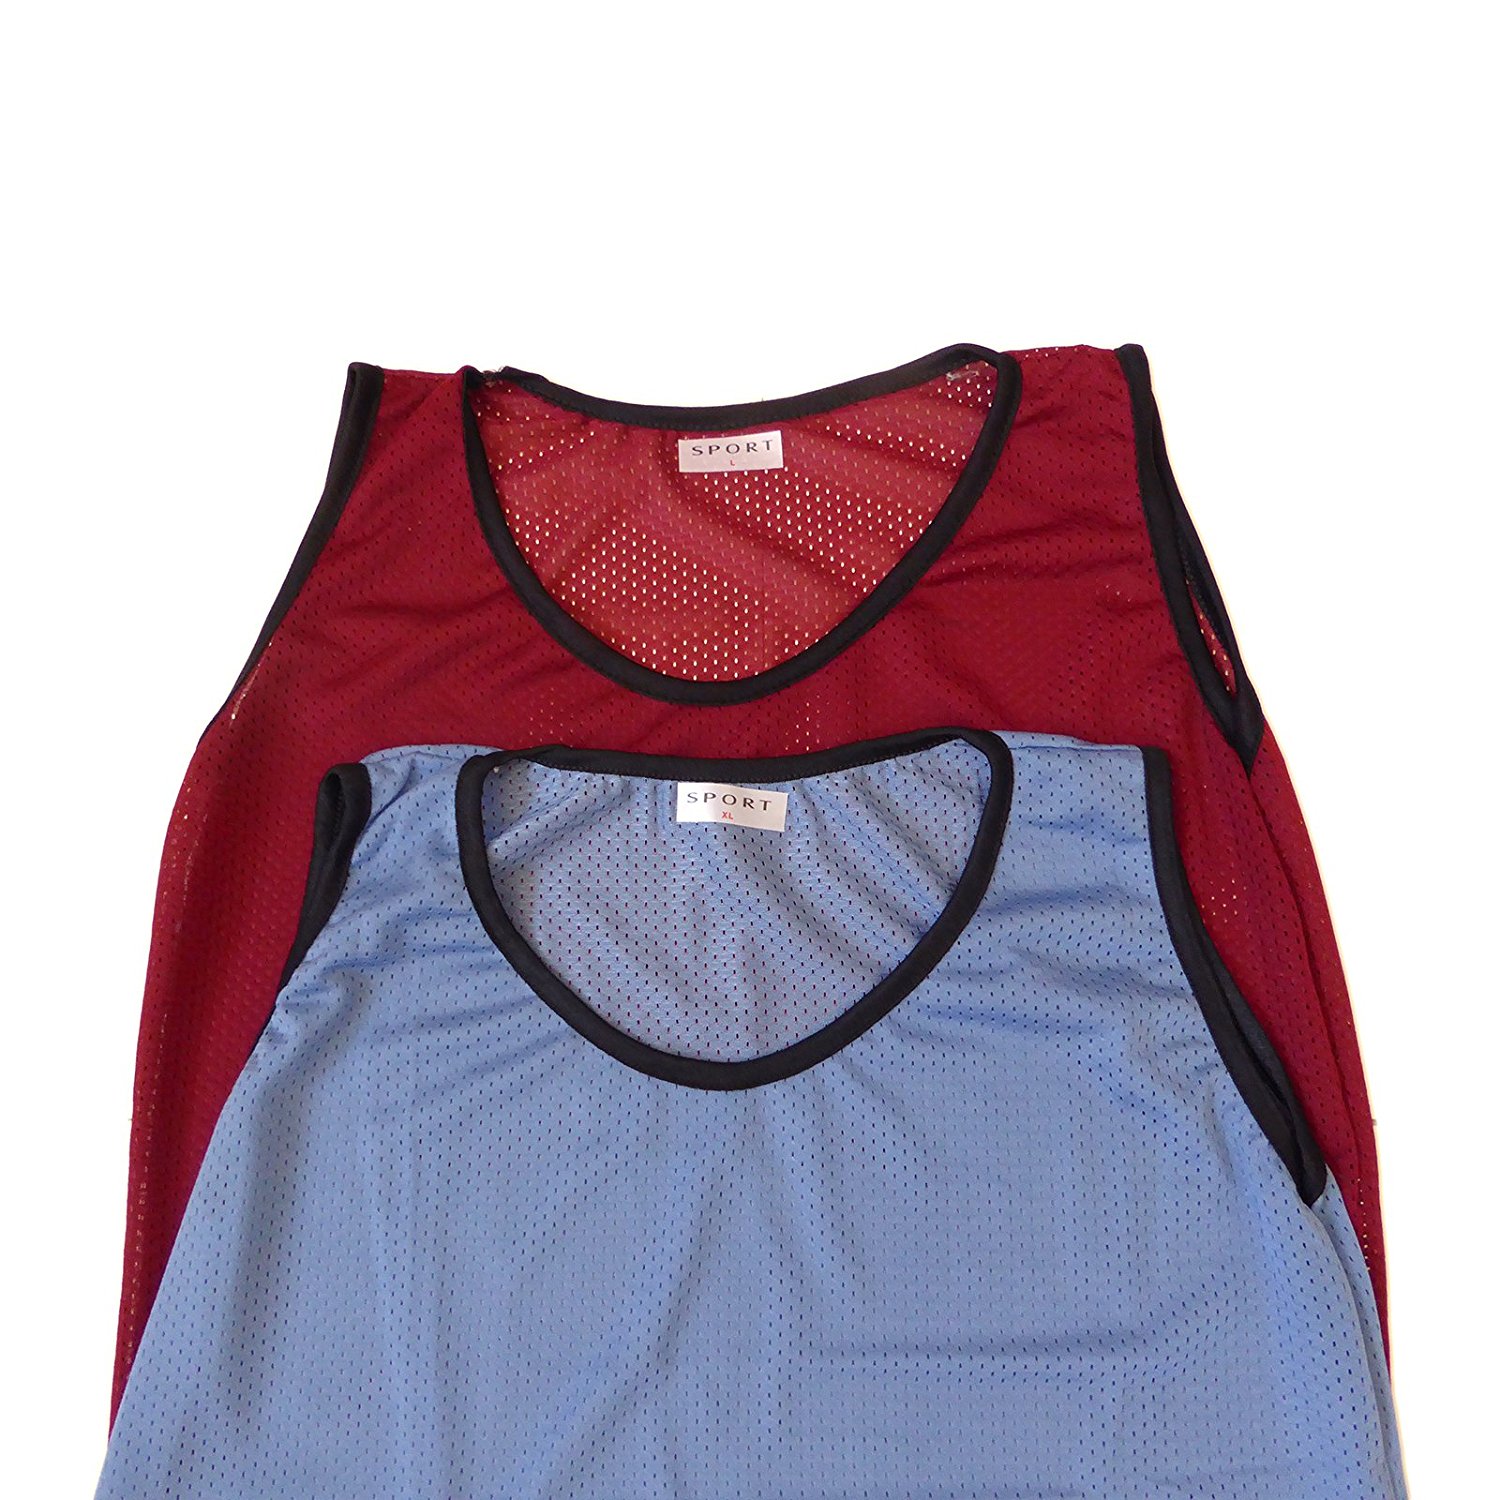 Giegxin 12 Pieces Soccer Practice Vests Youth Pinnies Jerseys Nylon Mesh  Scrimmage Pinnies for Youth Sports Team Training